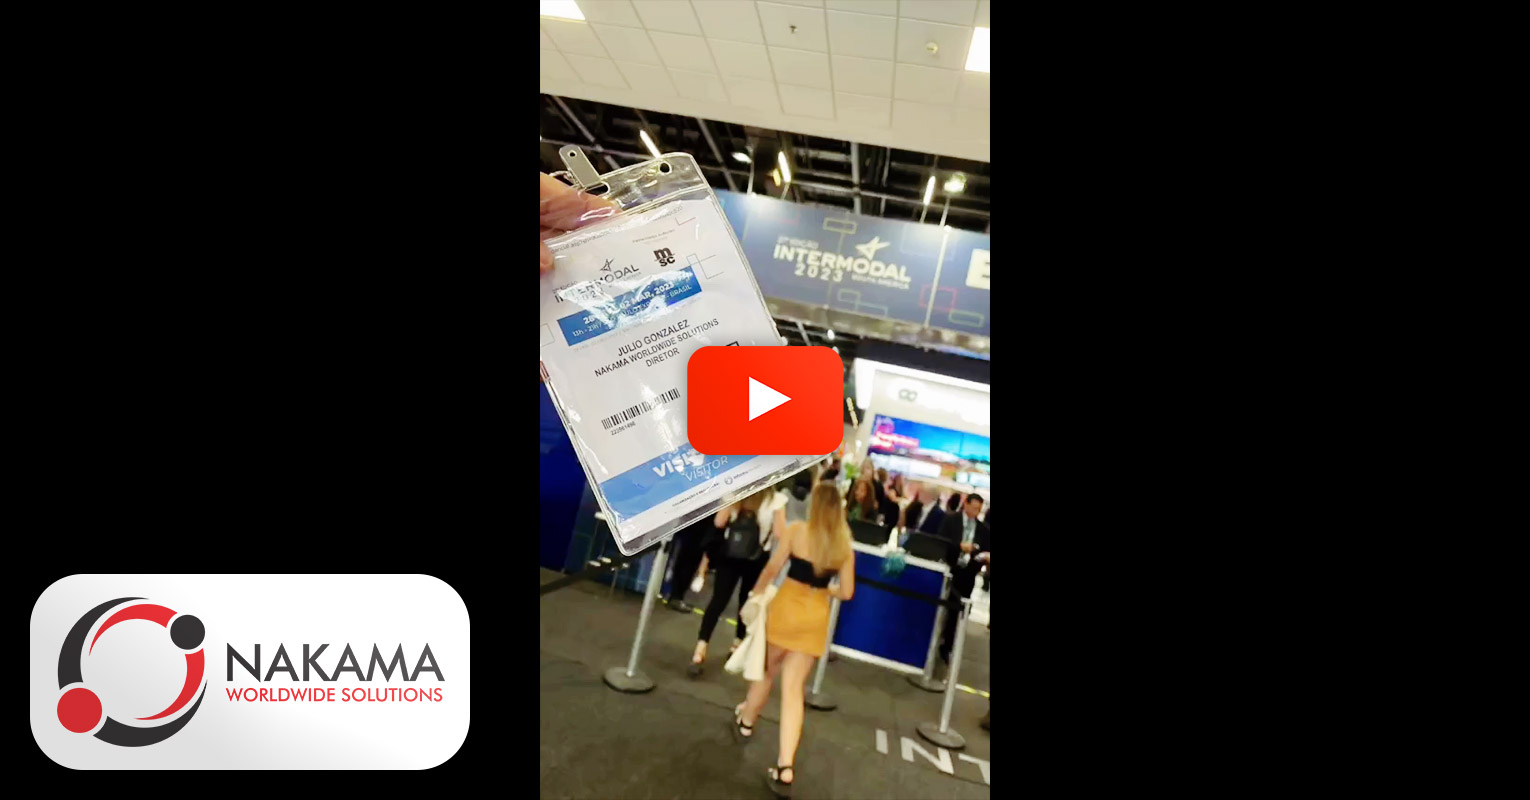 Video - Nakama Worldwide Solutions at the 27th Intermodal South America Event